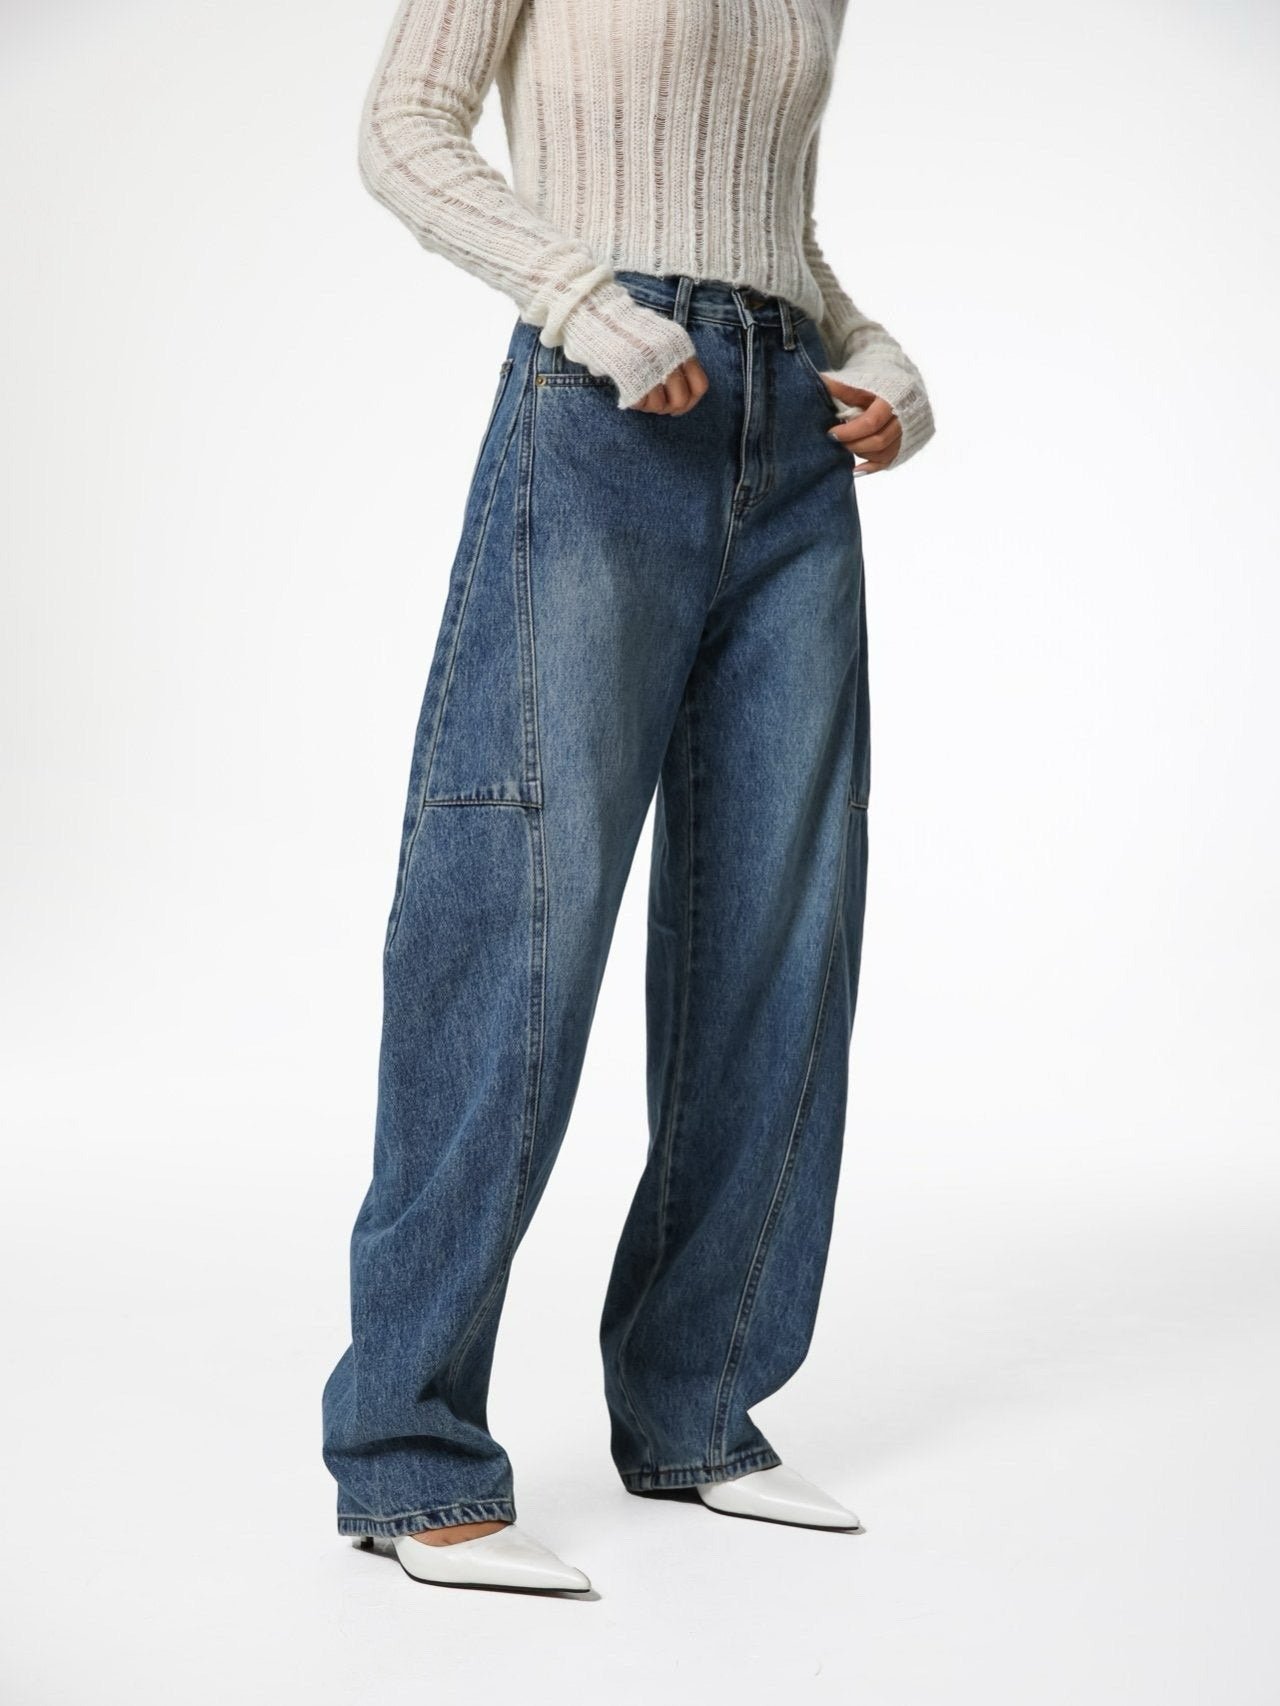 【PAPERMOON ペーパームーン】AW / Side Stitch Detail Voulme Blue Denim Jeans